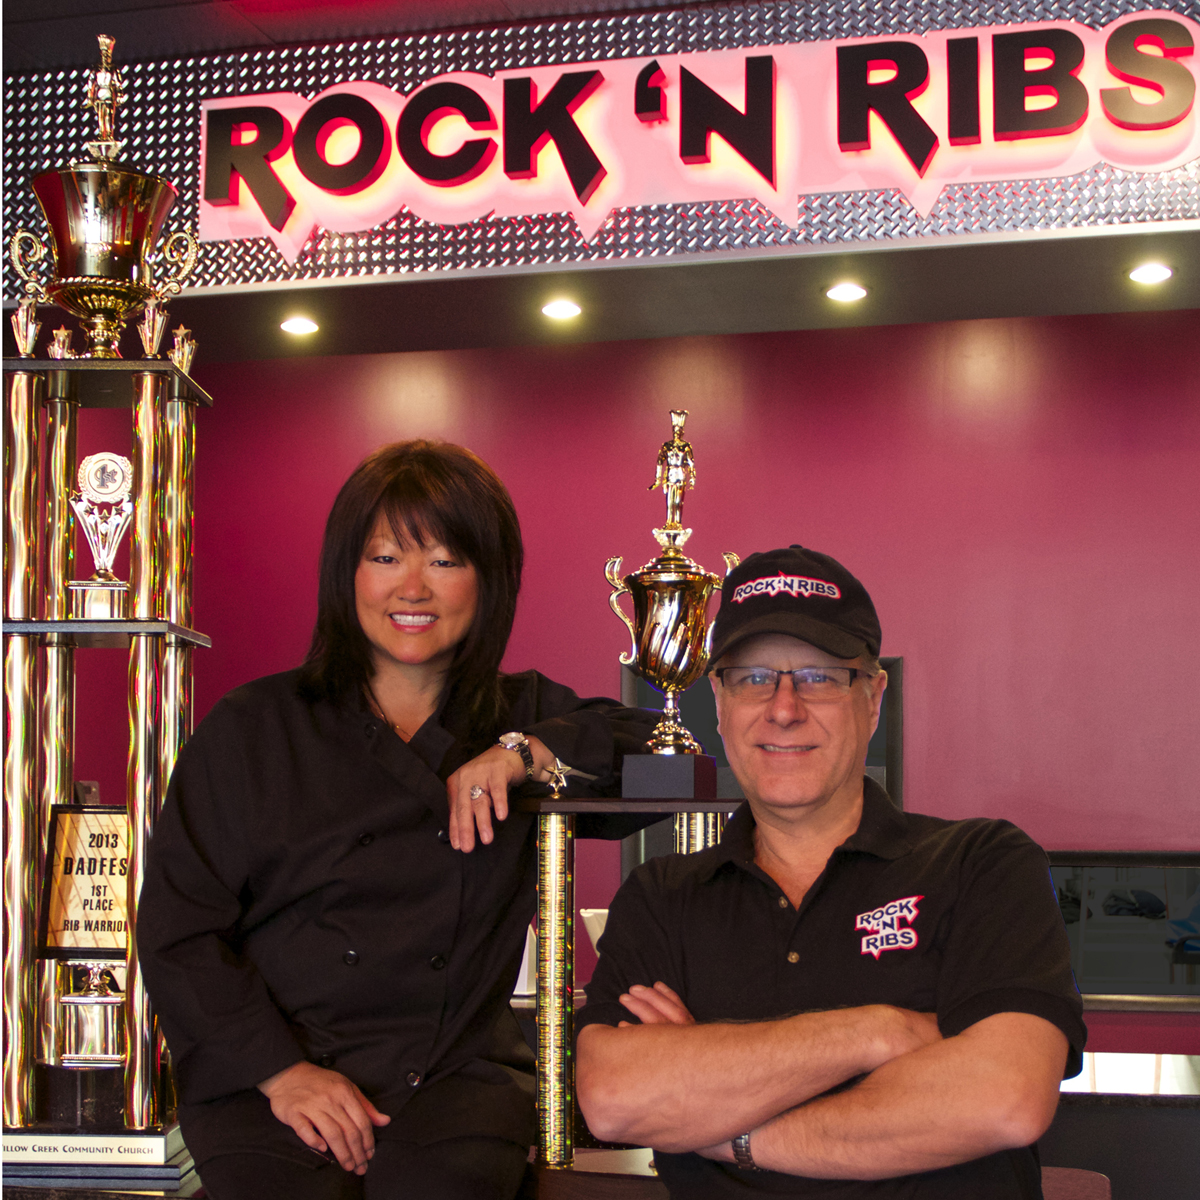 After winning numerous awards for her specialty barbecue, Alice Banach, with her husband Terry, opened Rock 'N Ribs